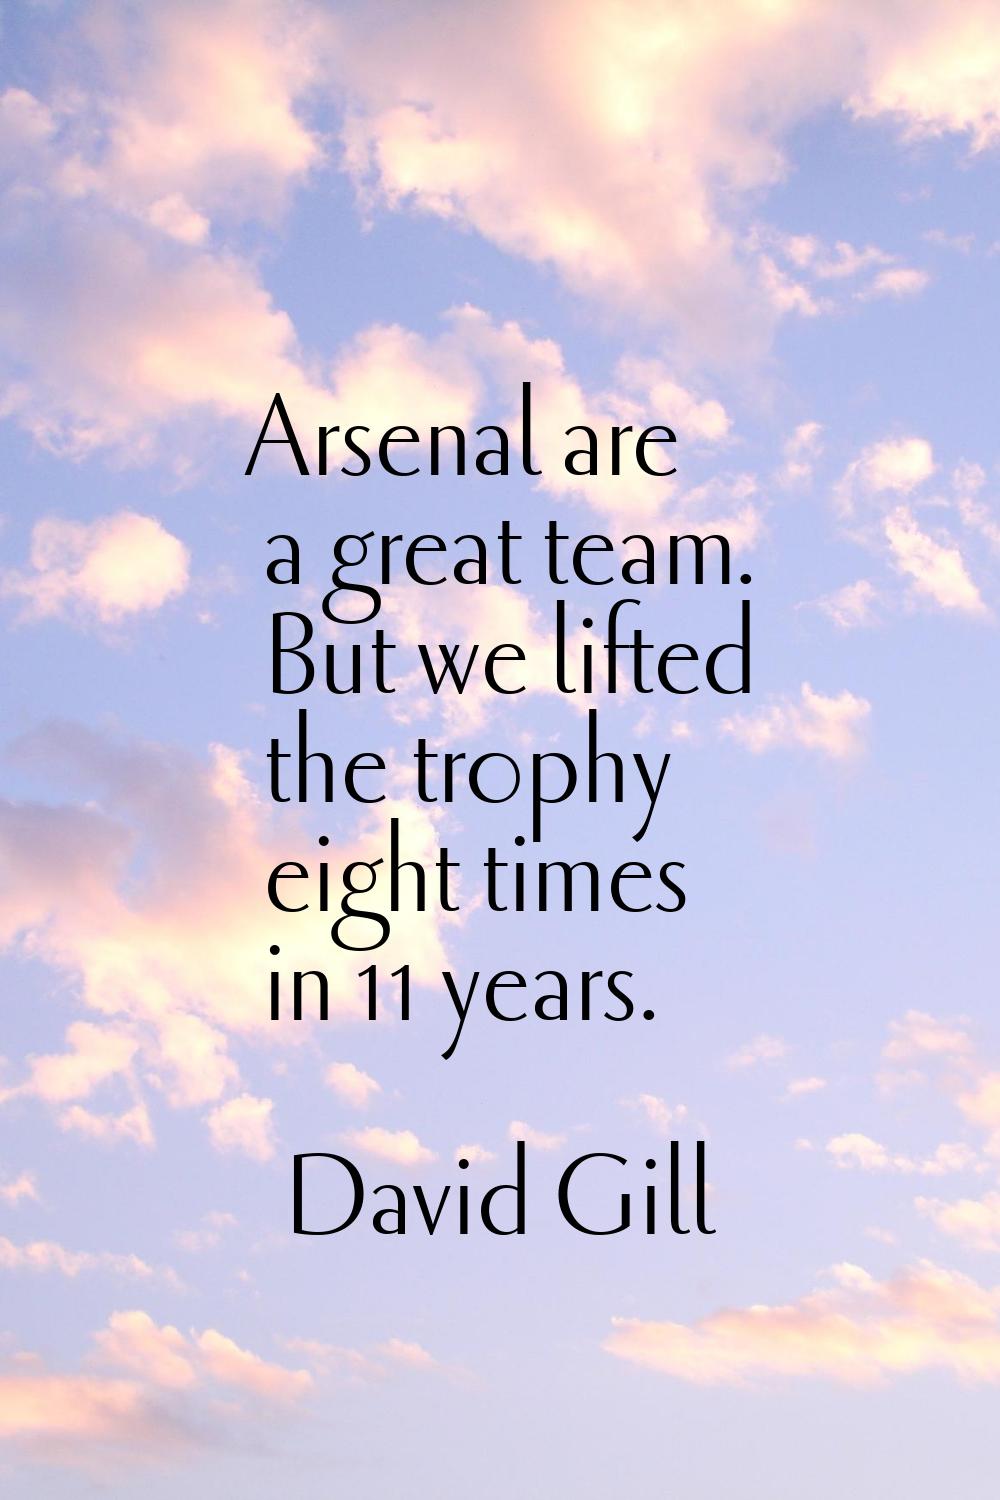 Arsenal are a great team. But we lifted the trophy eight times in 11 years.